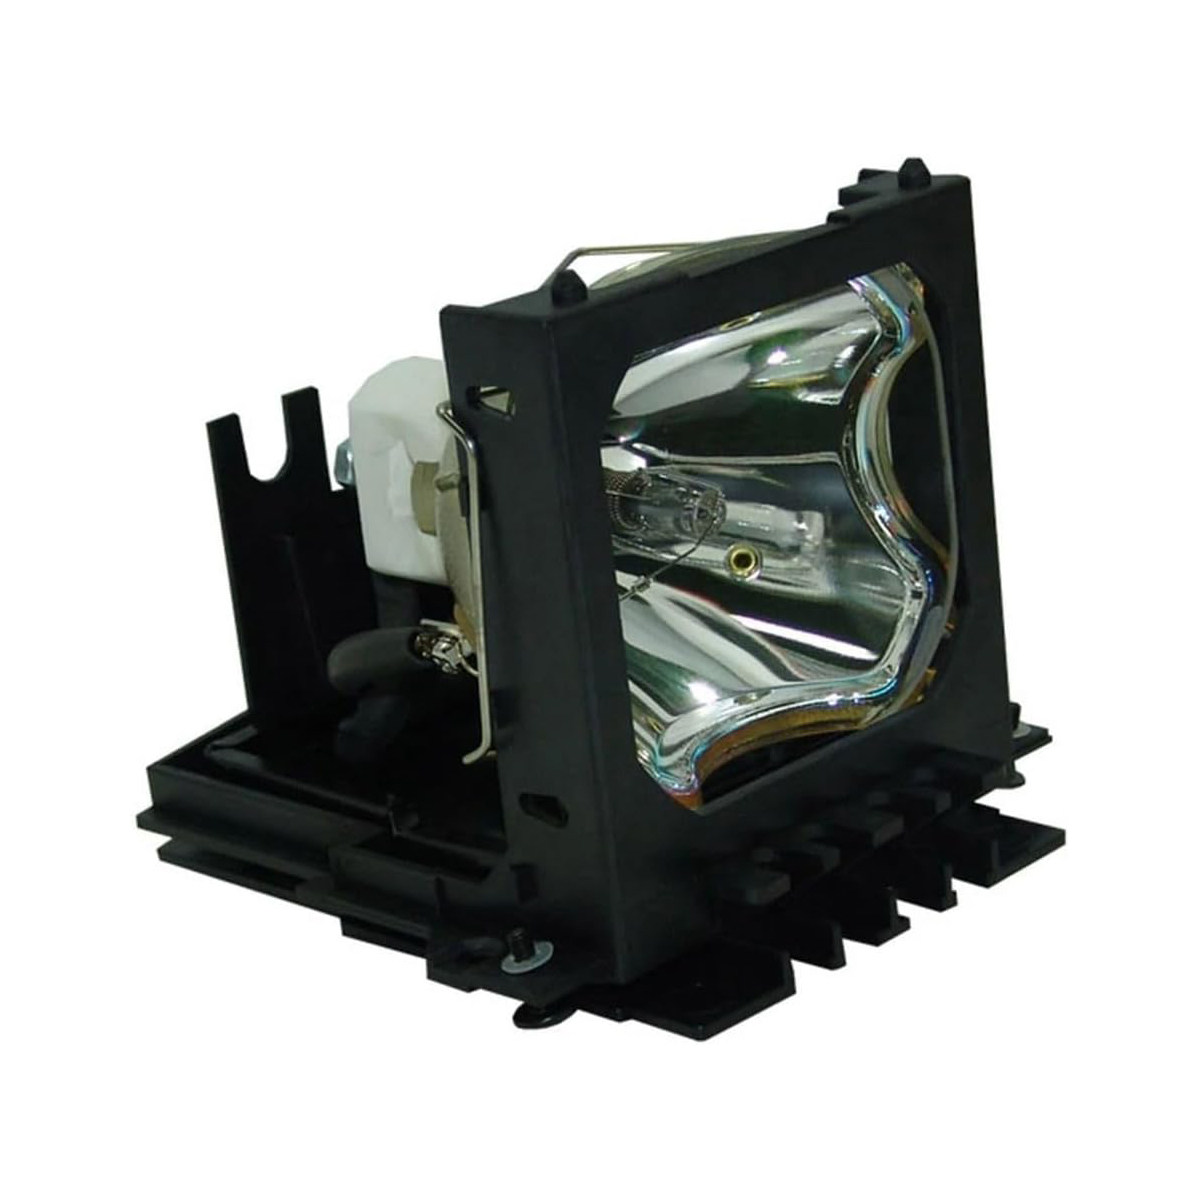 Replacement Projector lamp 65.J0H07.CG1 For BenQ PB9200 PE9200